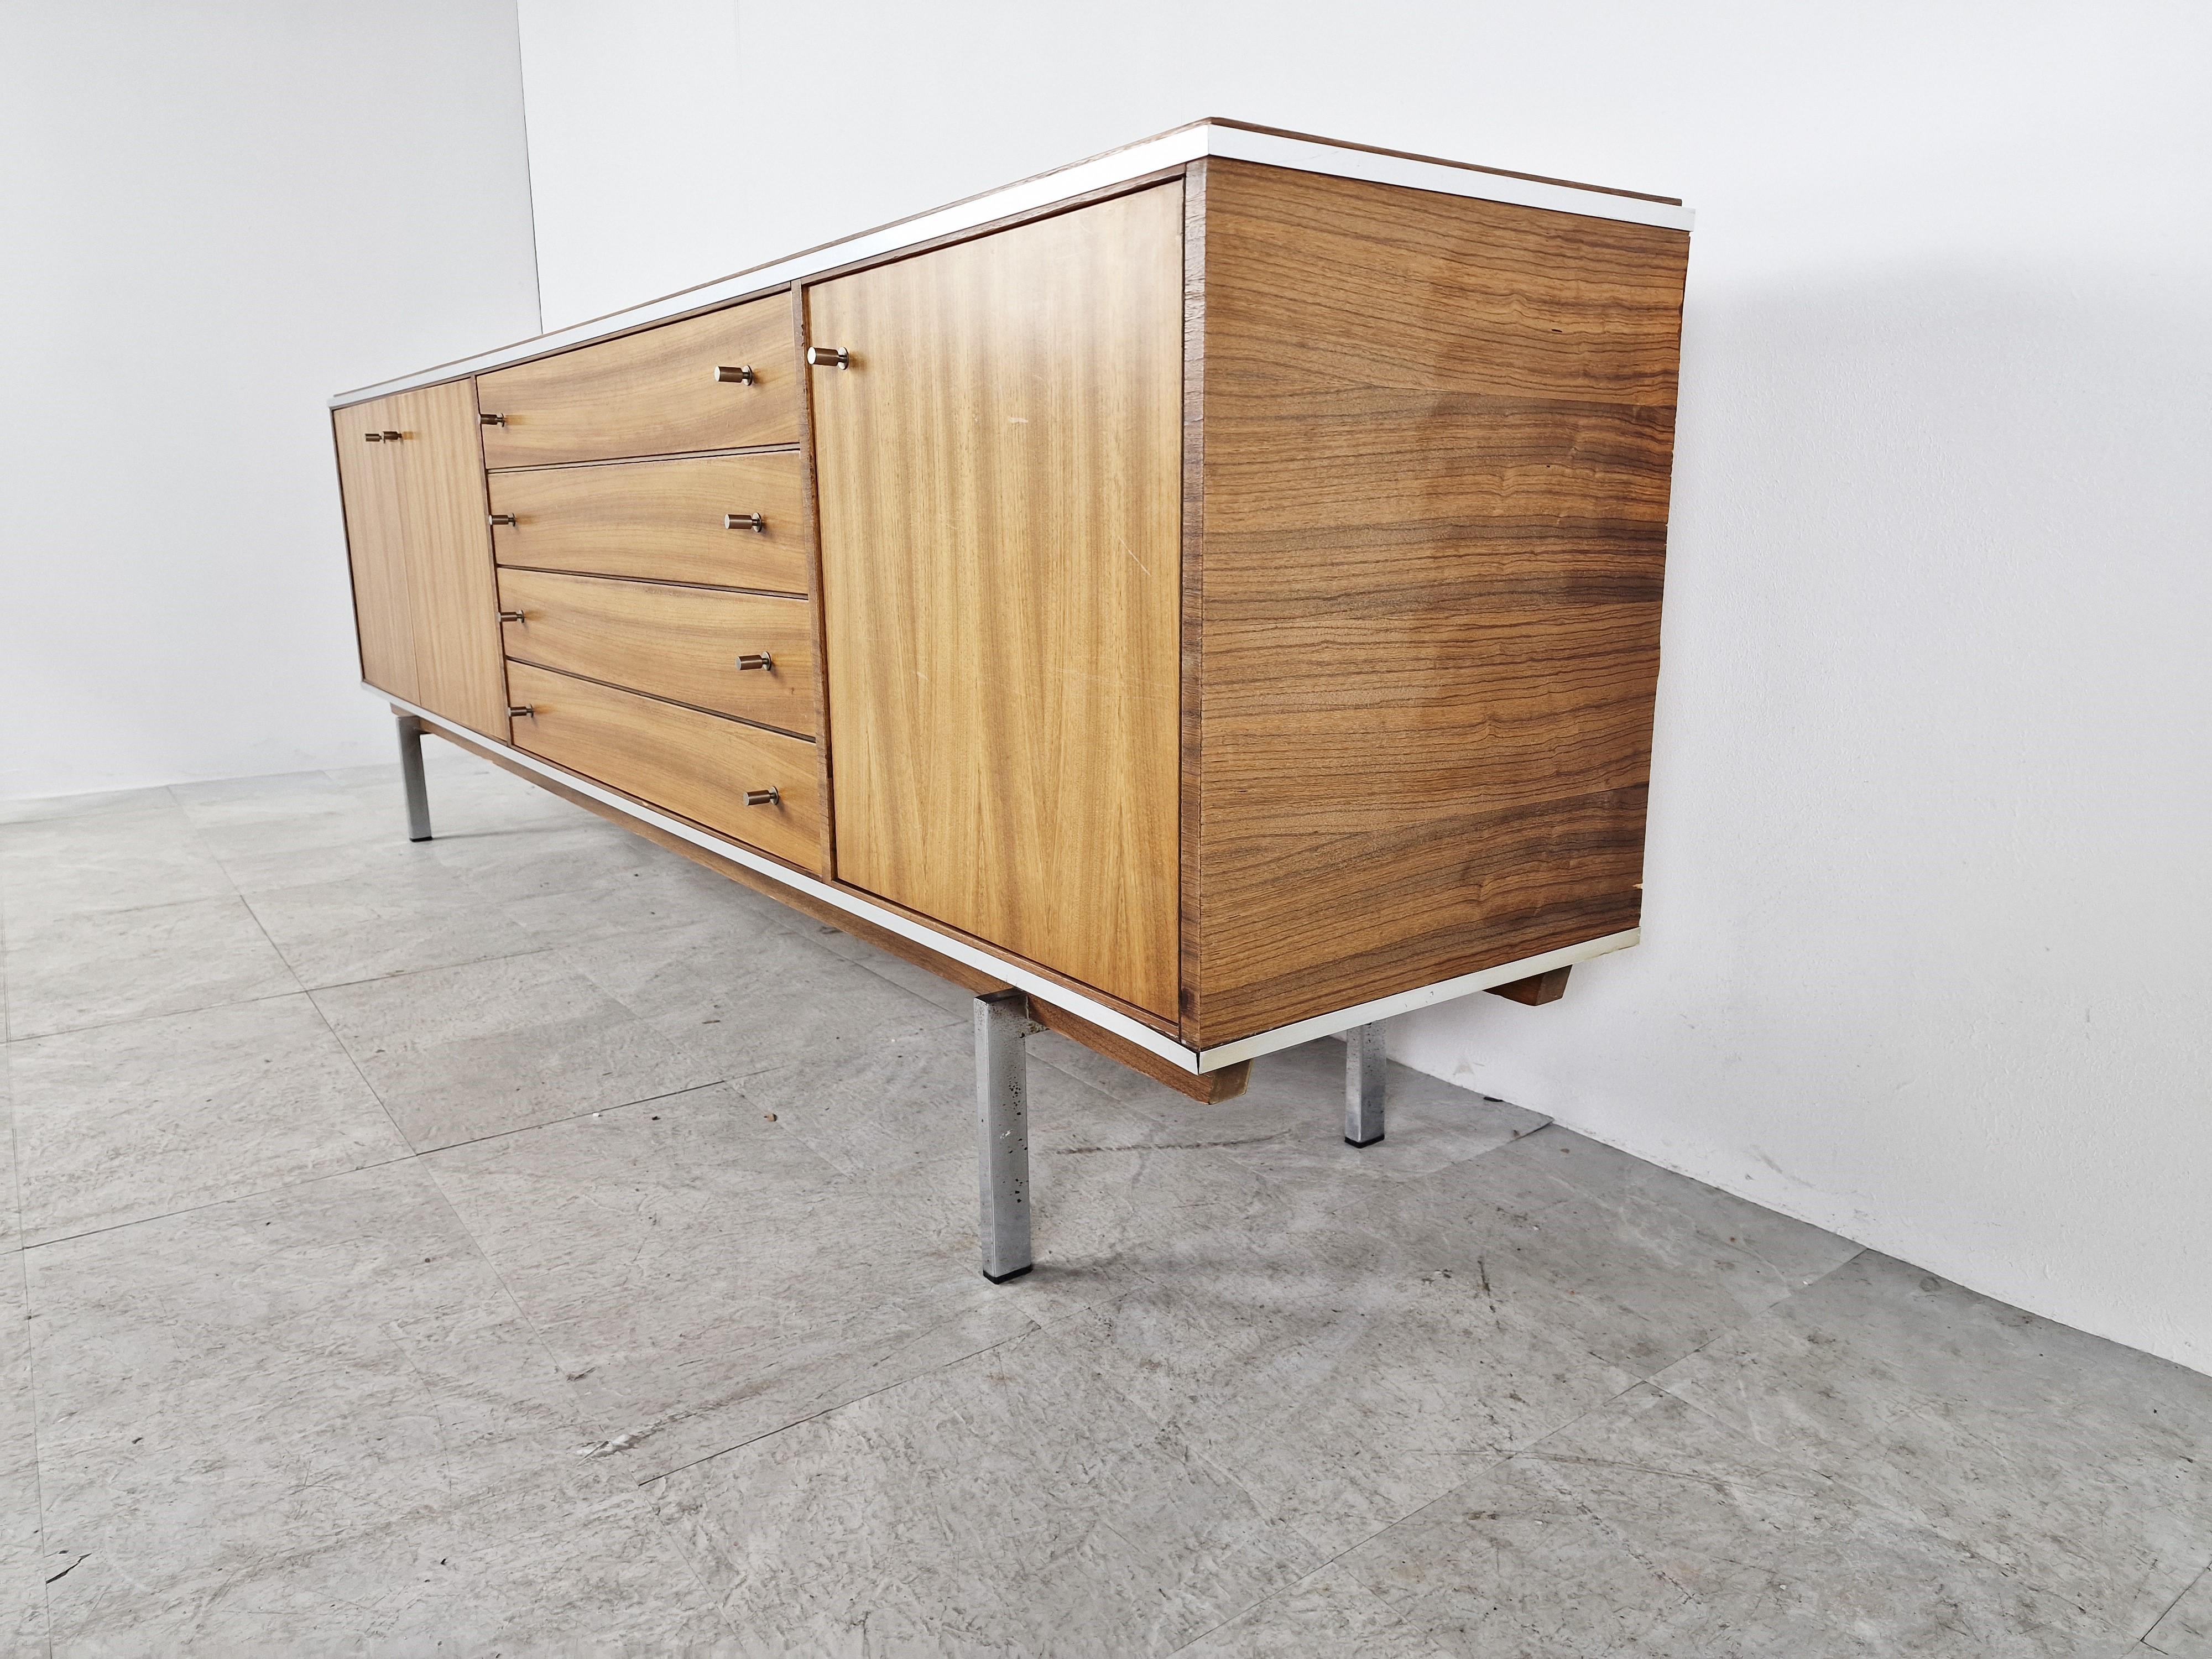 Mid century modern sideboard by Pieter de Bruyne for AL meubel.

Beautiful timeless design with a beautiful wood patern.

Chromed steel legs.

Good condition with normal age related wear.

1960s - Belgium

Dimensions:
Lenght: